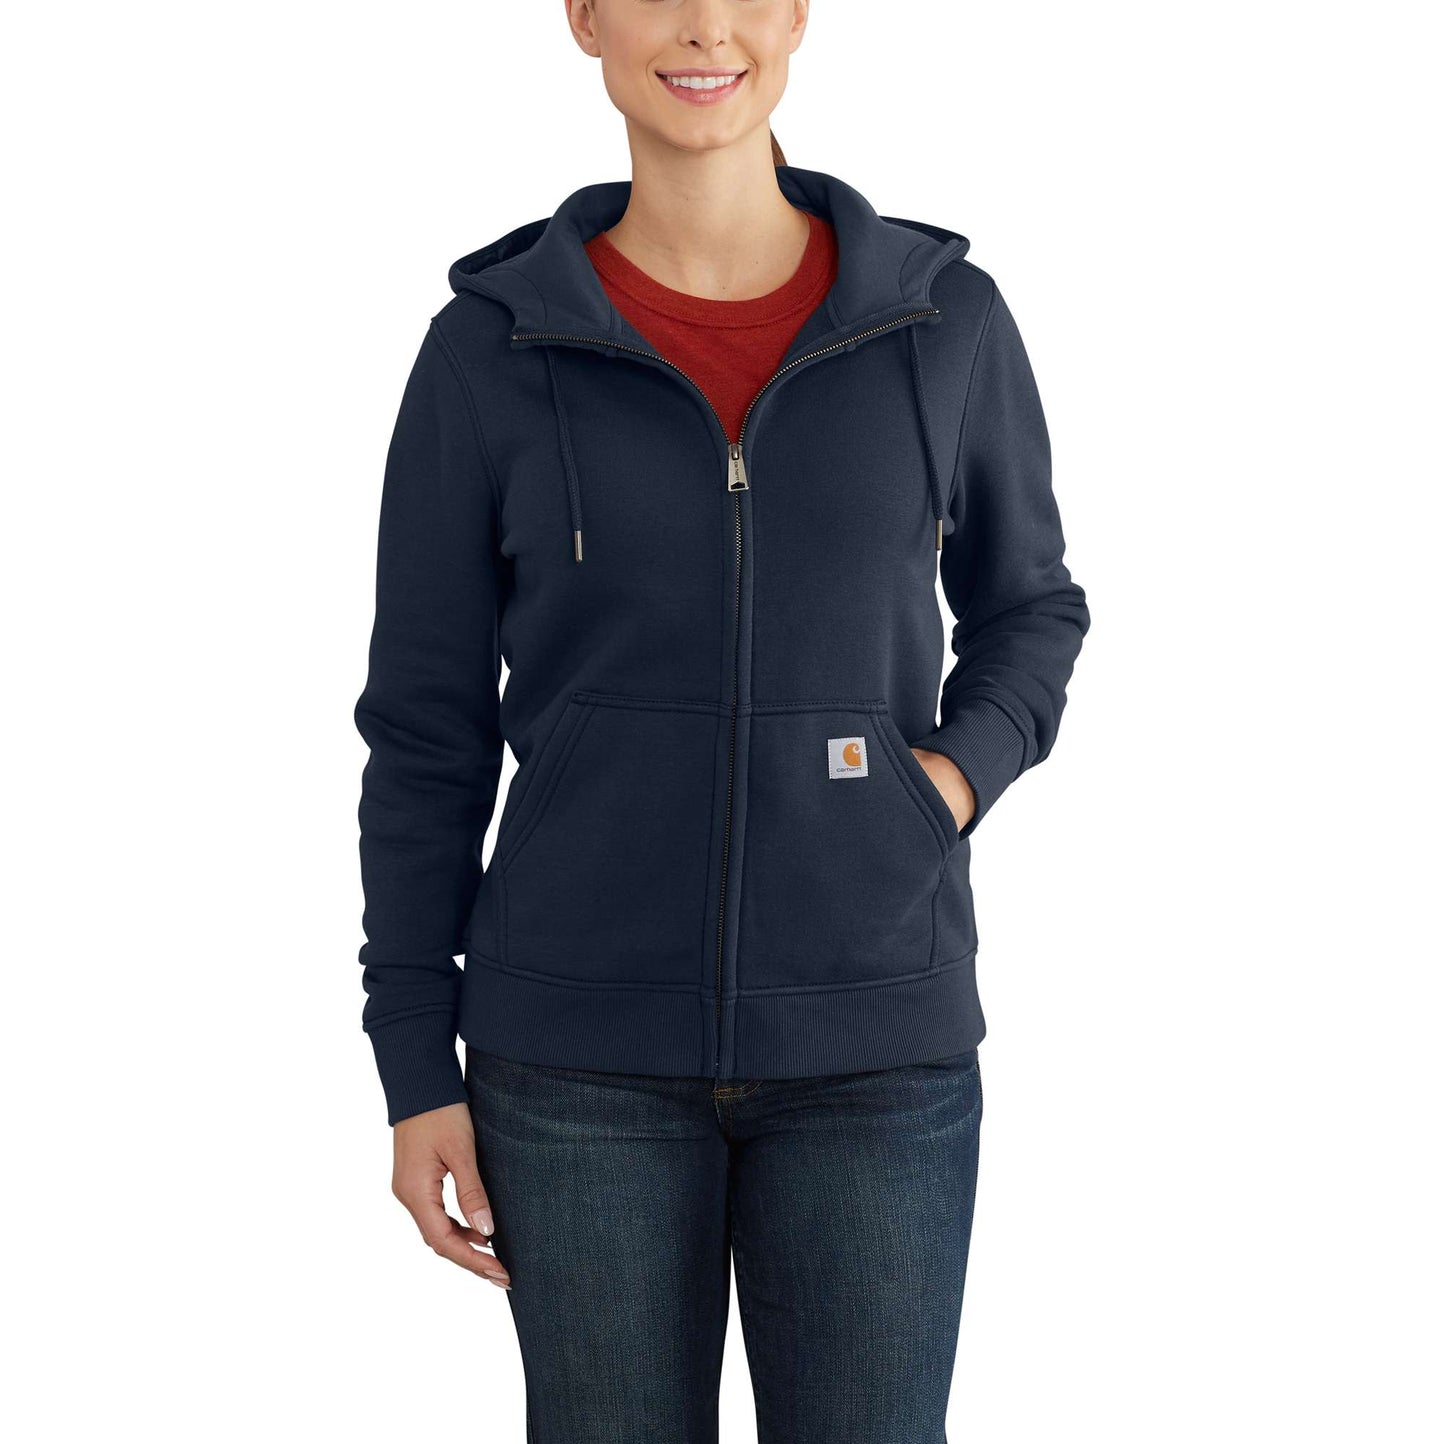 Relaxed Fit Midweight Full-Zip Sweatshirt